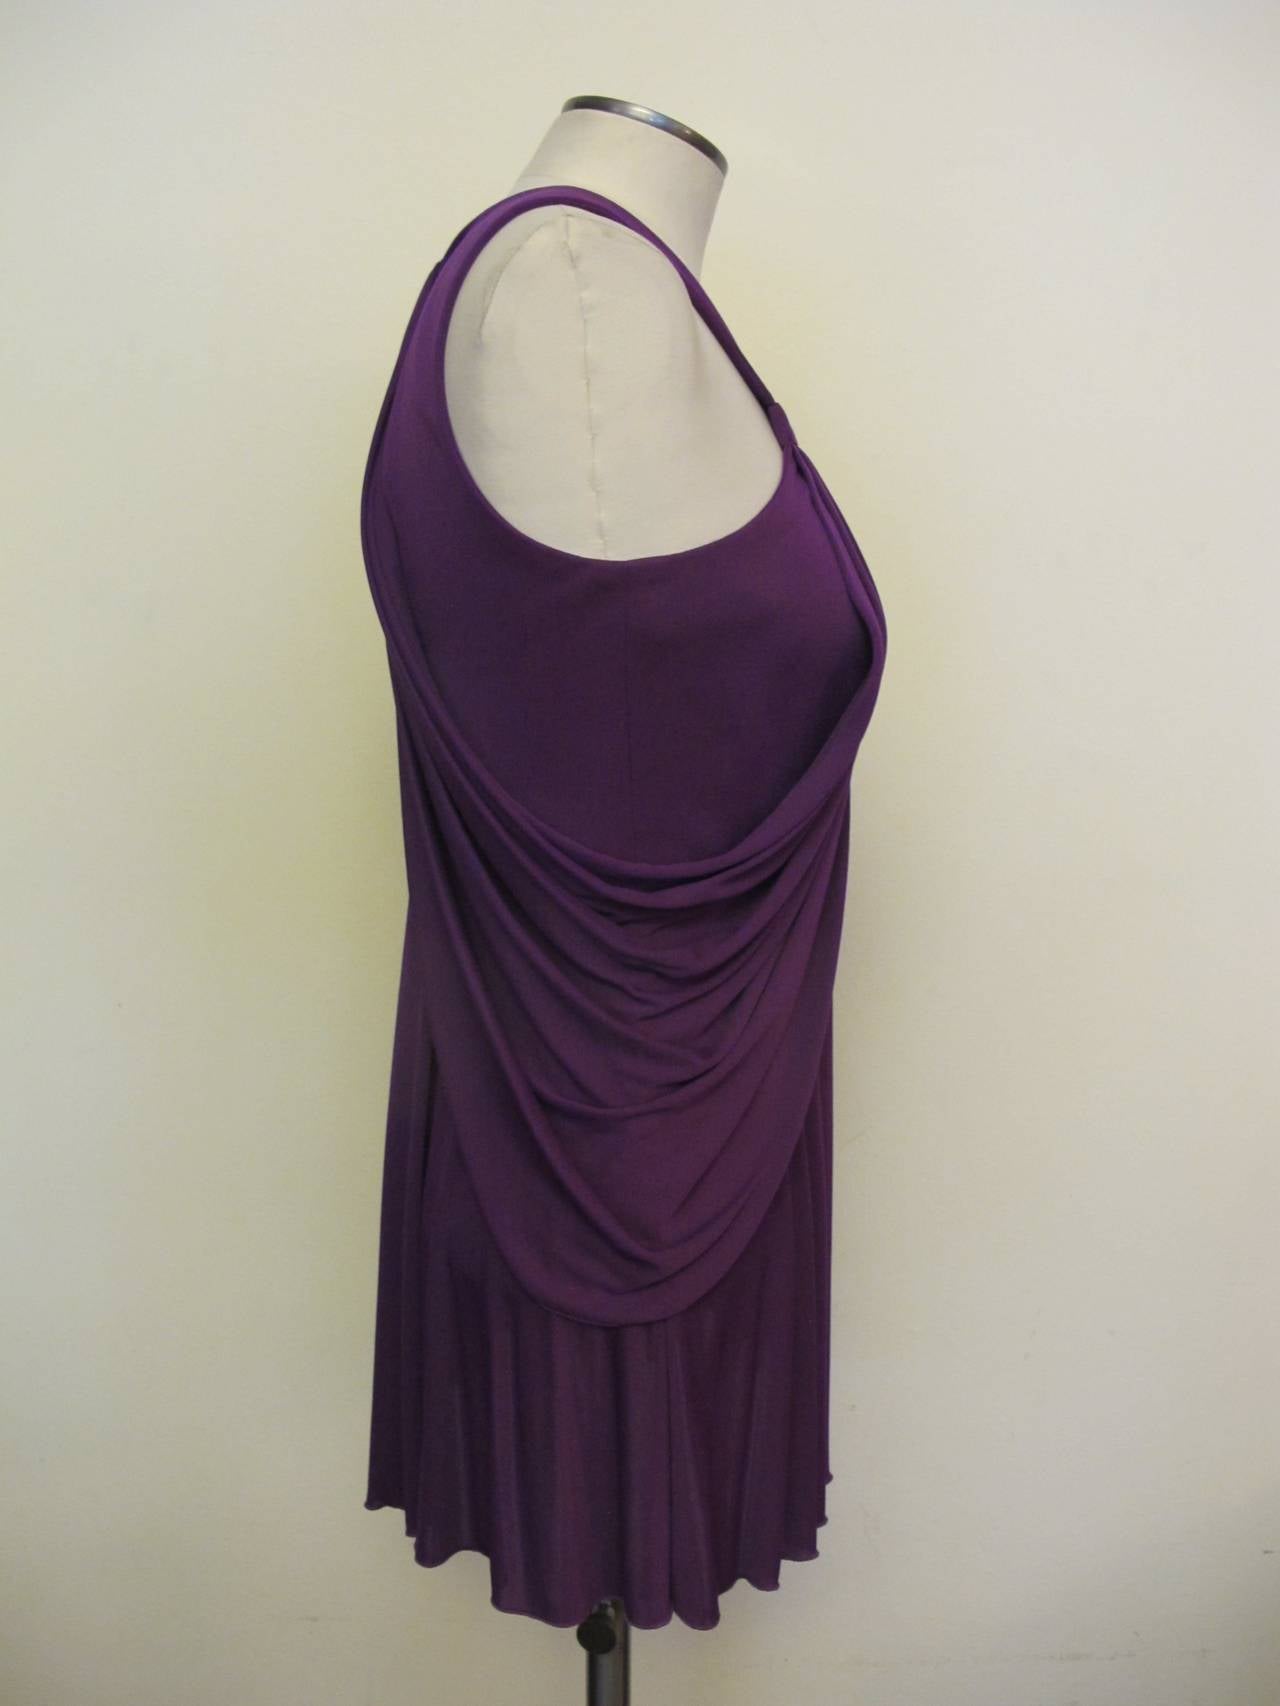 Gianni Versace Bright Purple Draped Blouse In Excellent Condition For Sale In San Francisco, CA